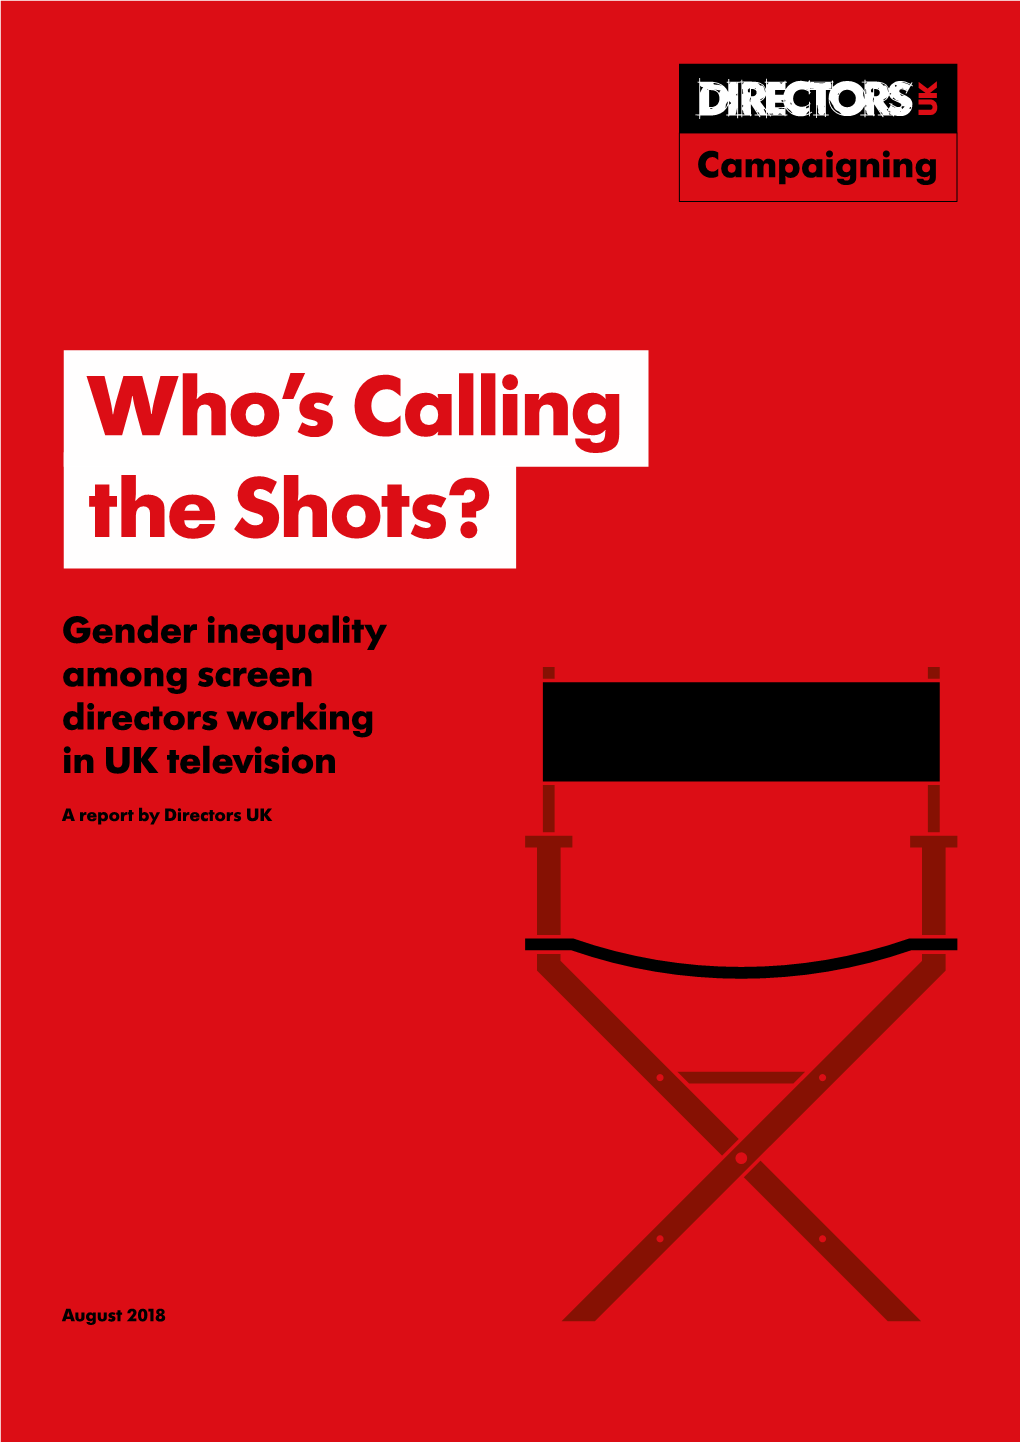 The Shots? Who's Calling